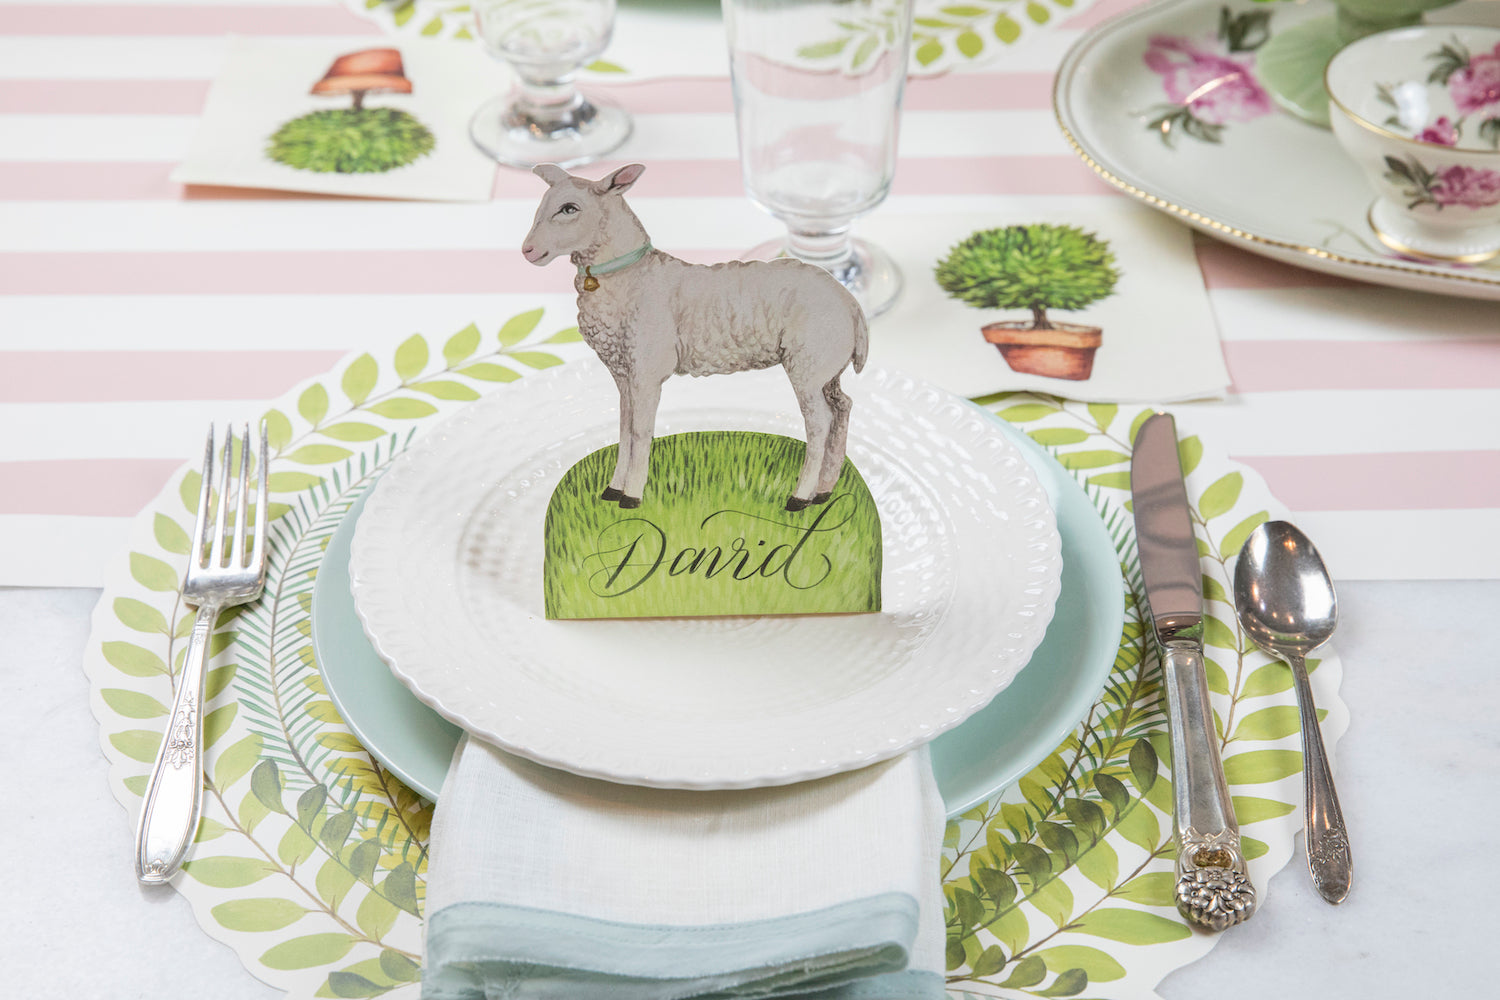 The Die-cut Seedling Wreath Placemat under an elegant place setting.